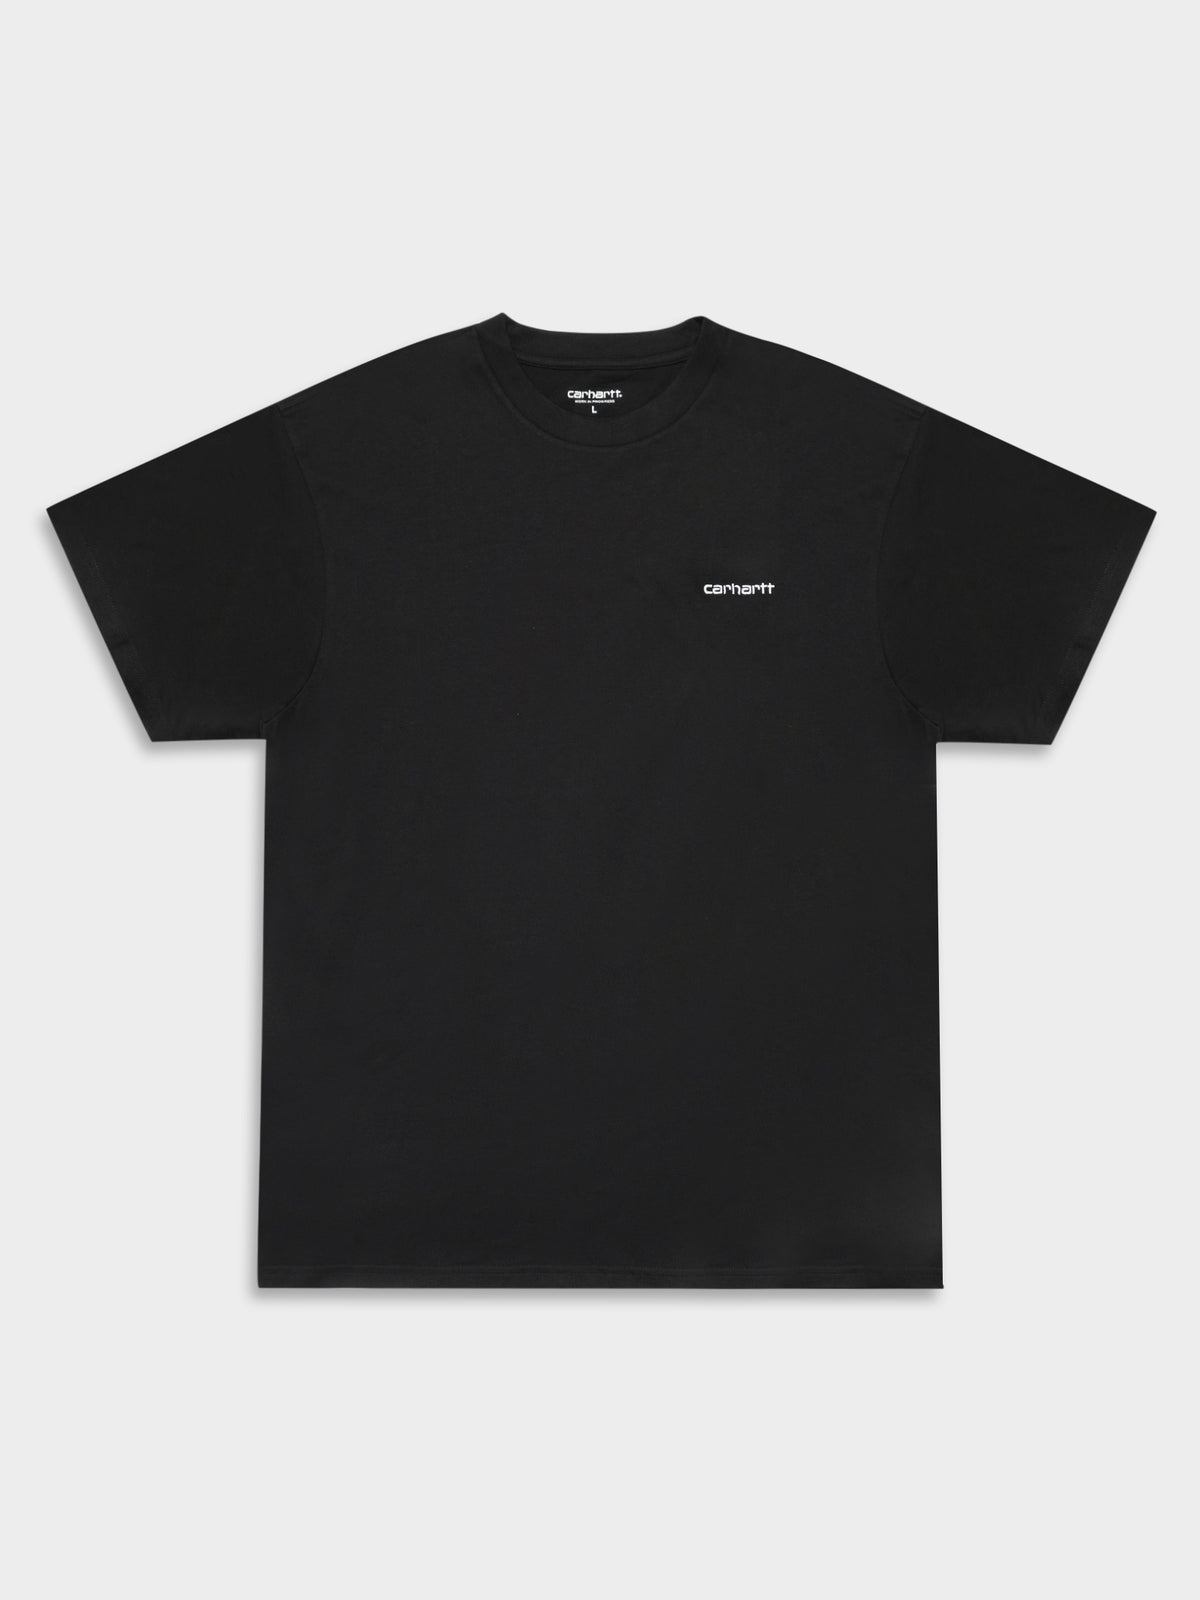 Short Sleeve Embroidered Script T-Shirt in Black